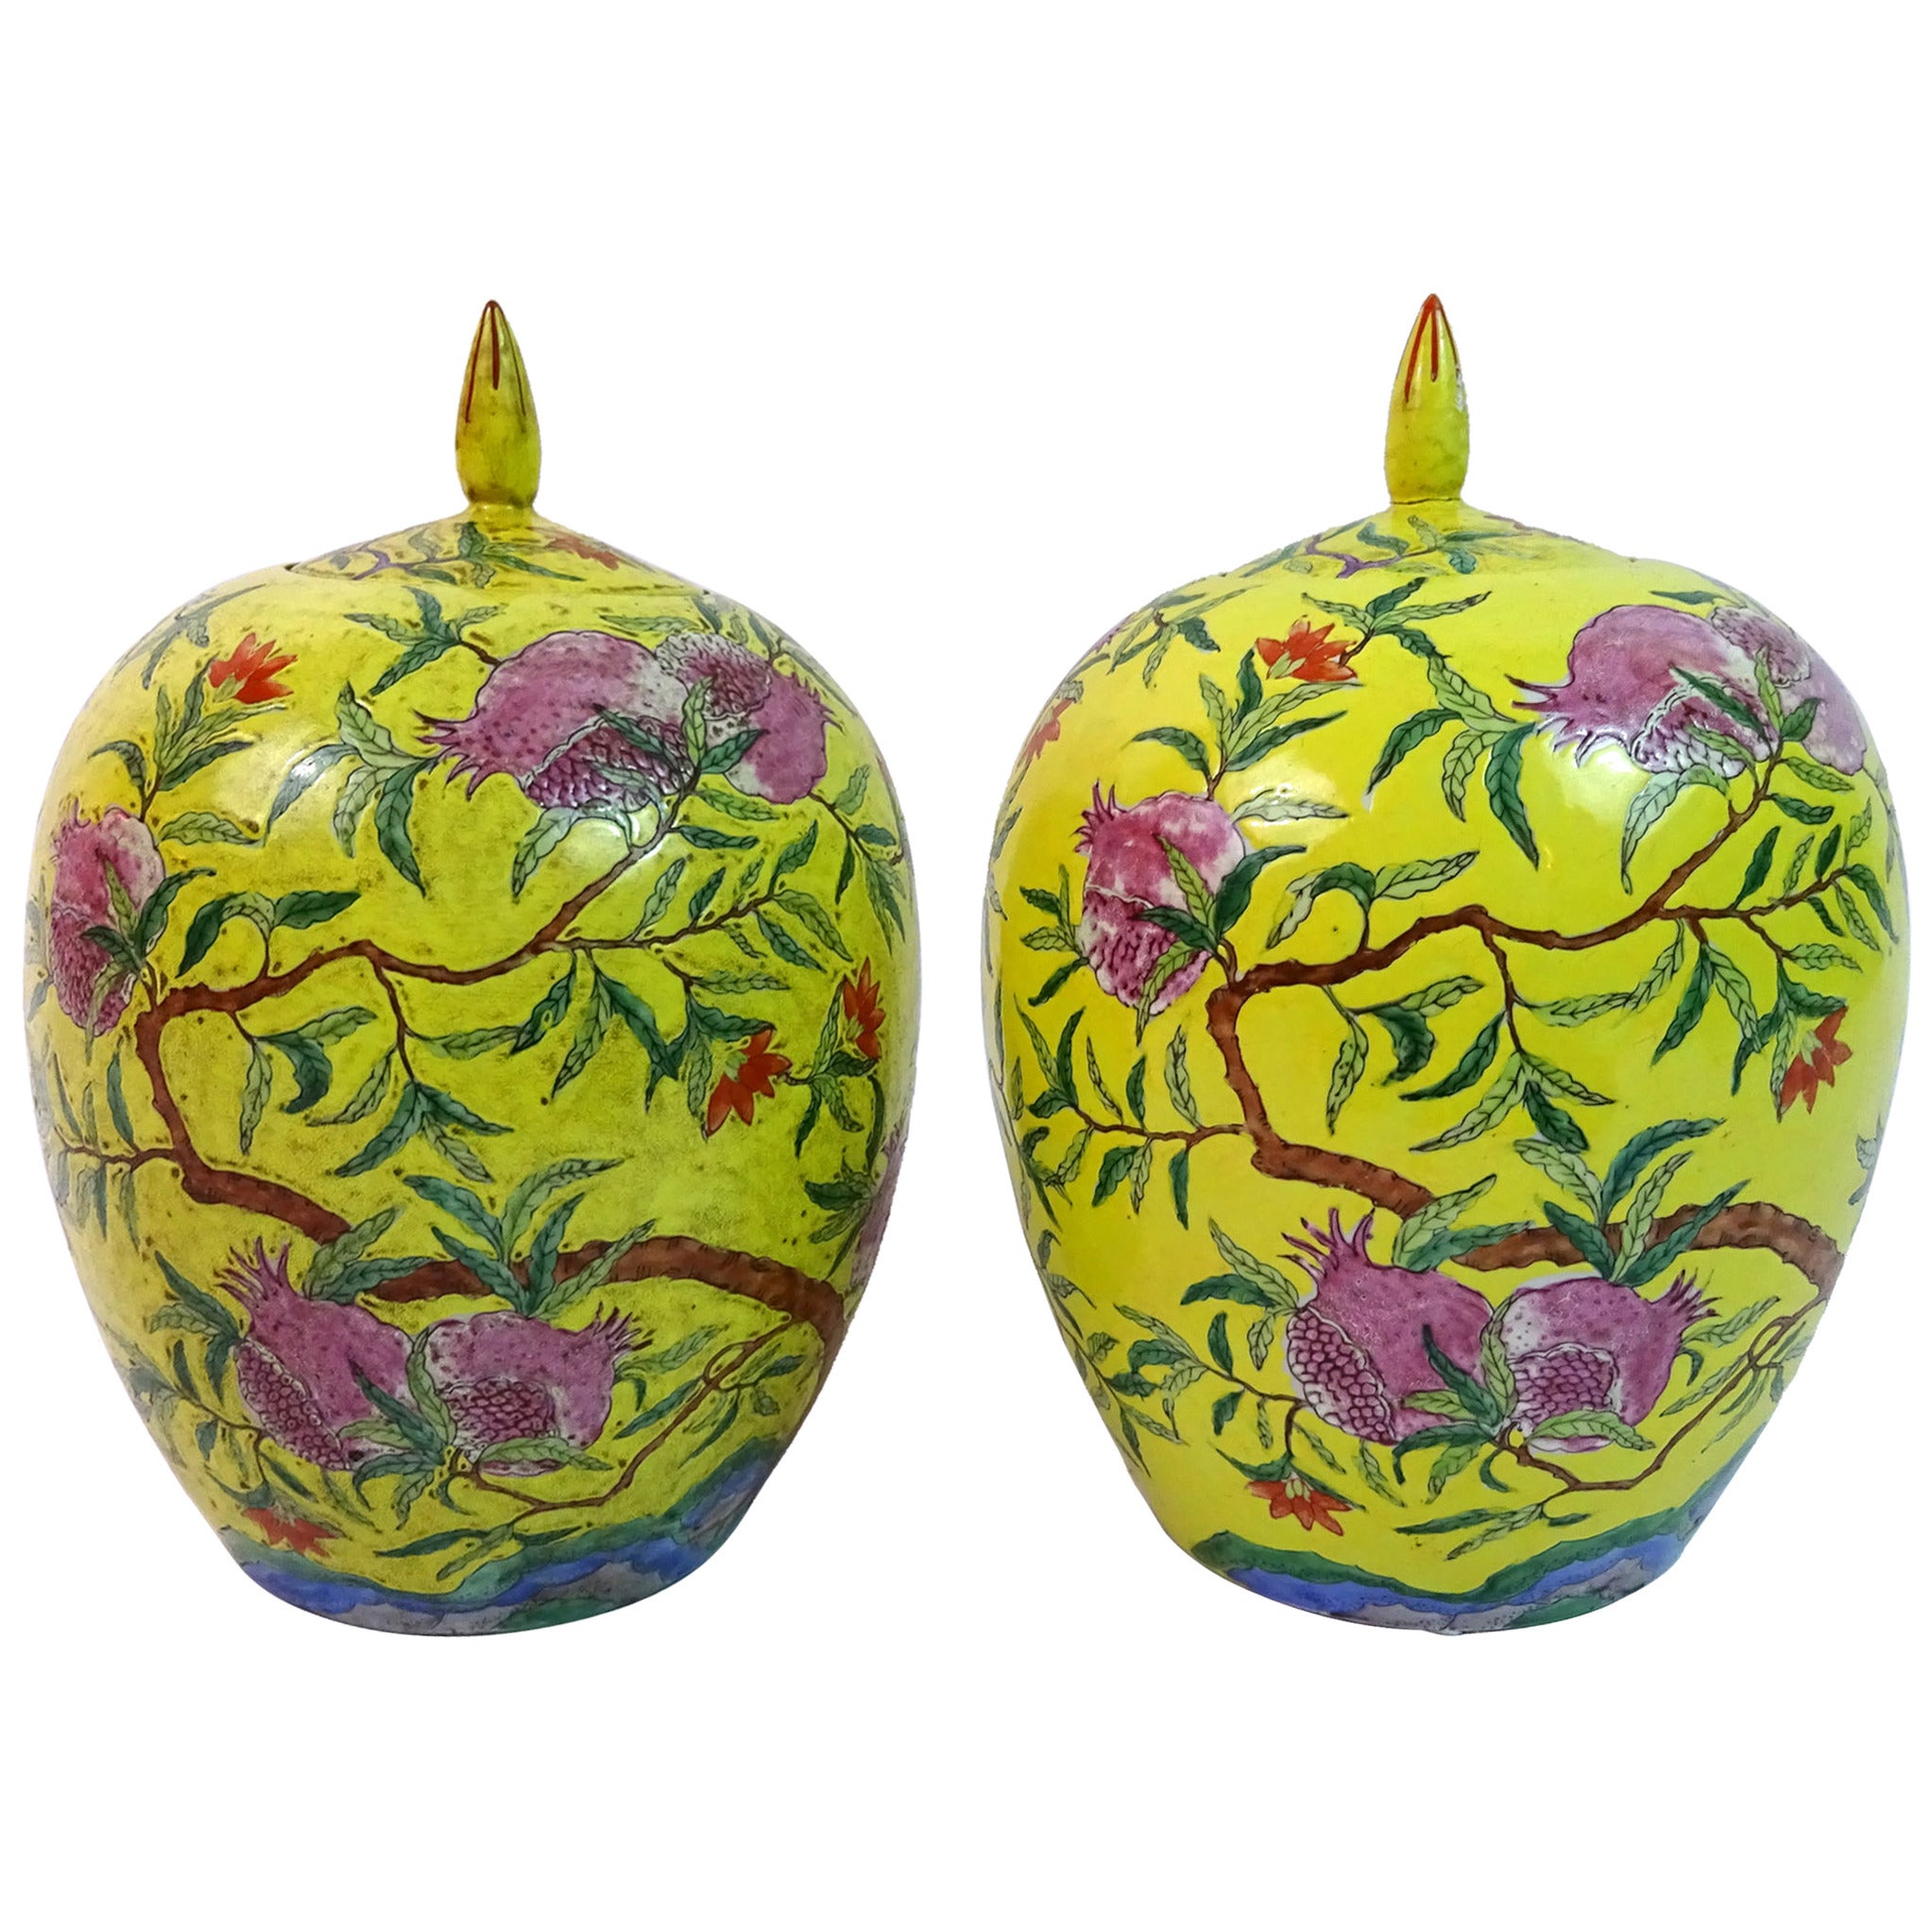 Pair of Early 20th Century Chinese Famille Jaune Covered Vases